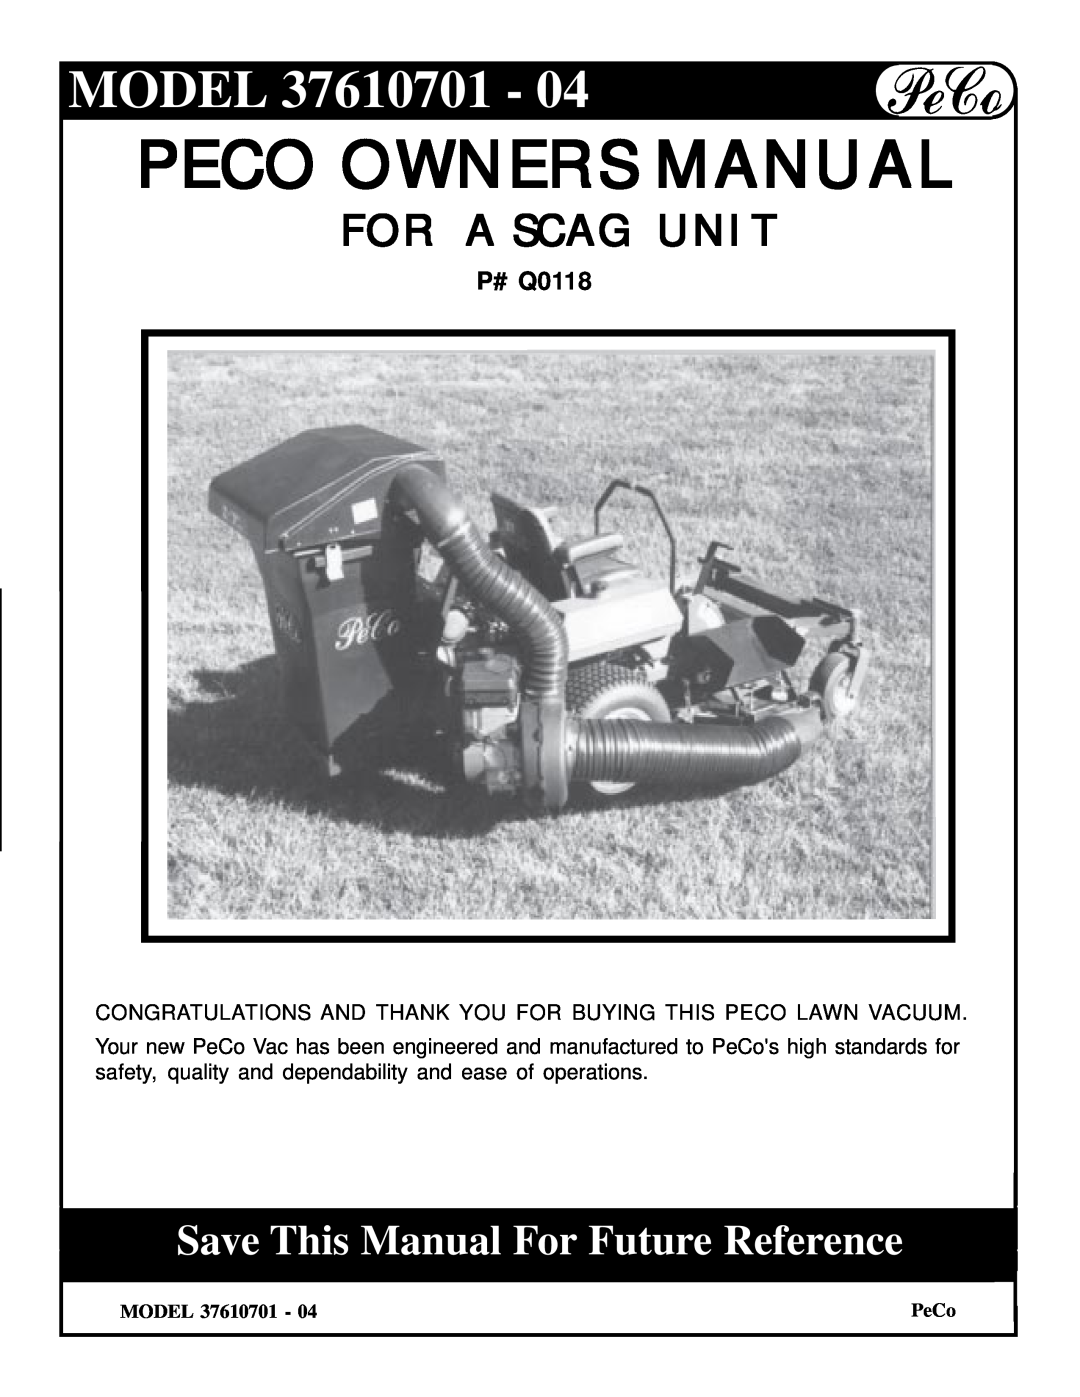 Briggs & Stratton 37610701 - 04 owner manual Model, P# Q0118, For A Scag Unit, Save This Manual For Future Reference 